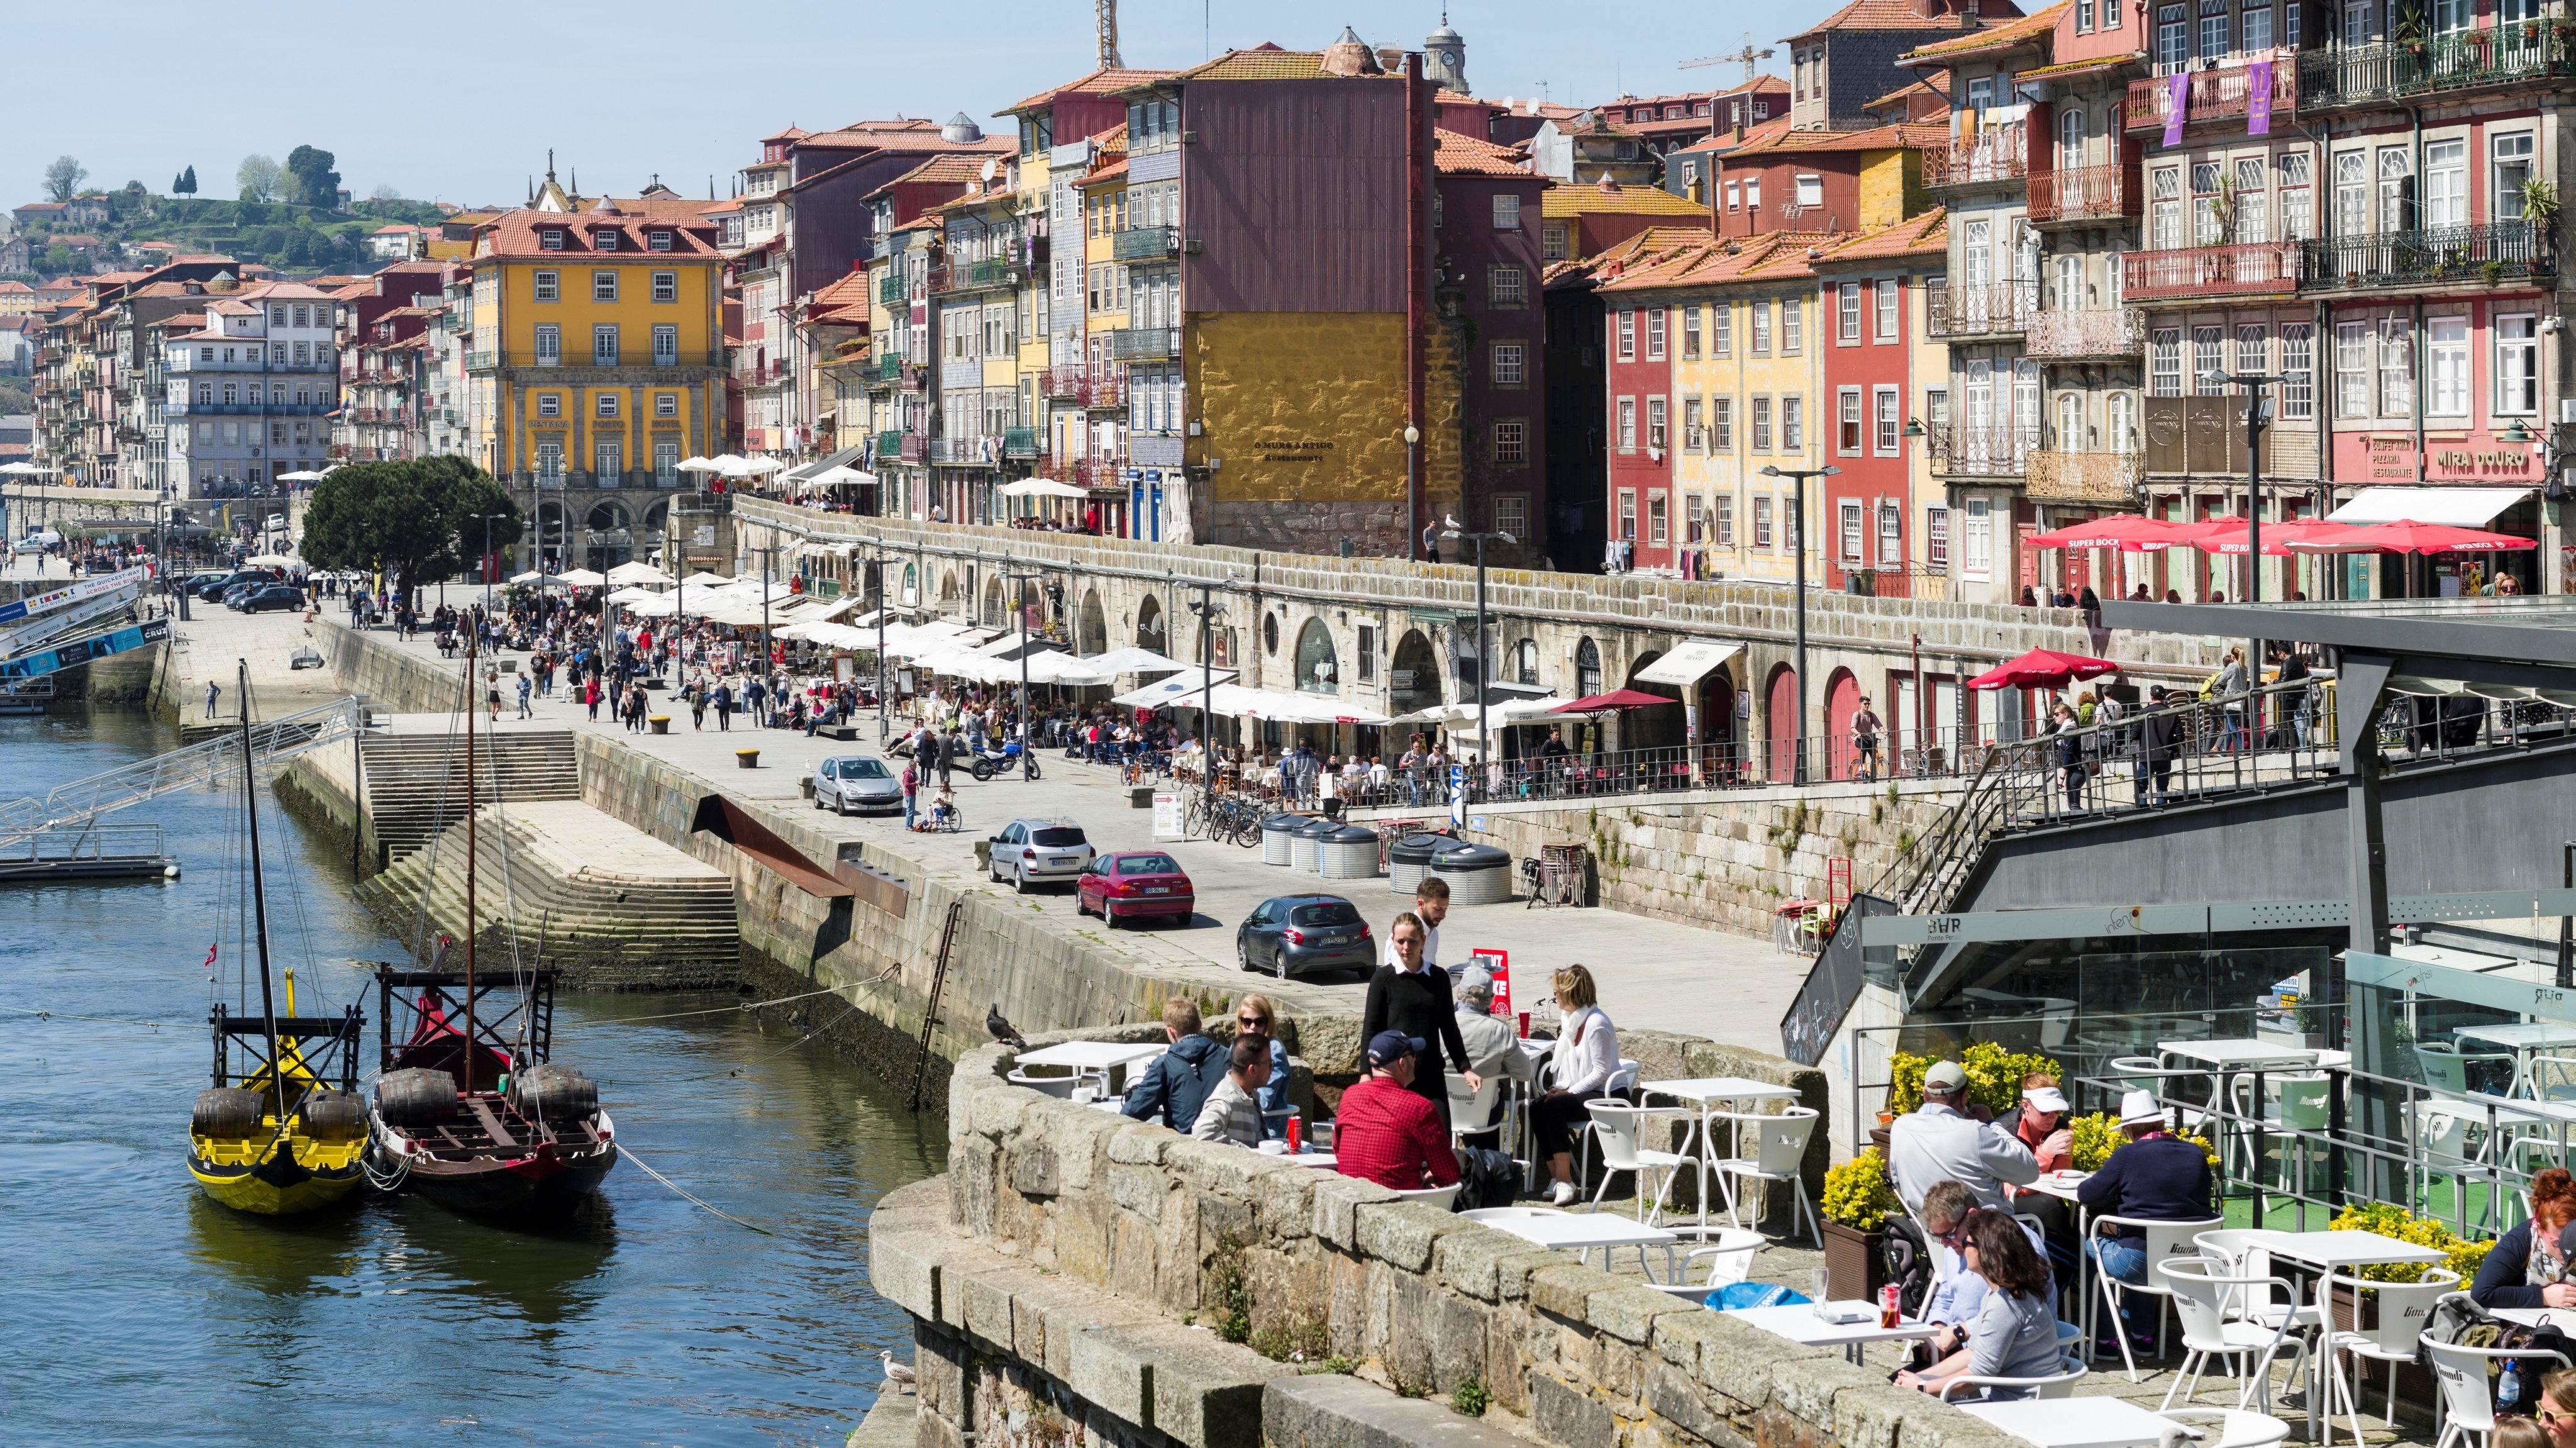 The quarter Ribeira at the old harbour in the old town with the iconic row of houses